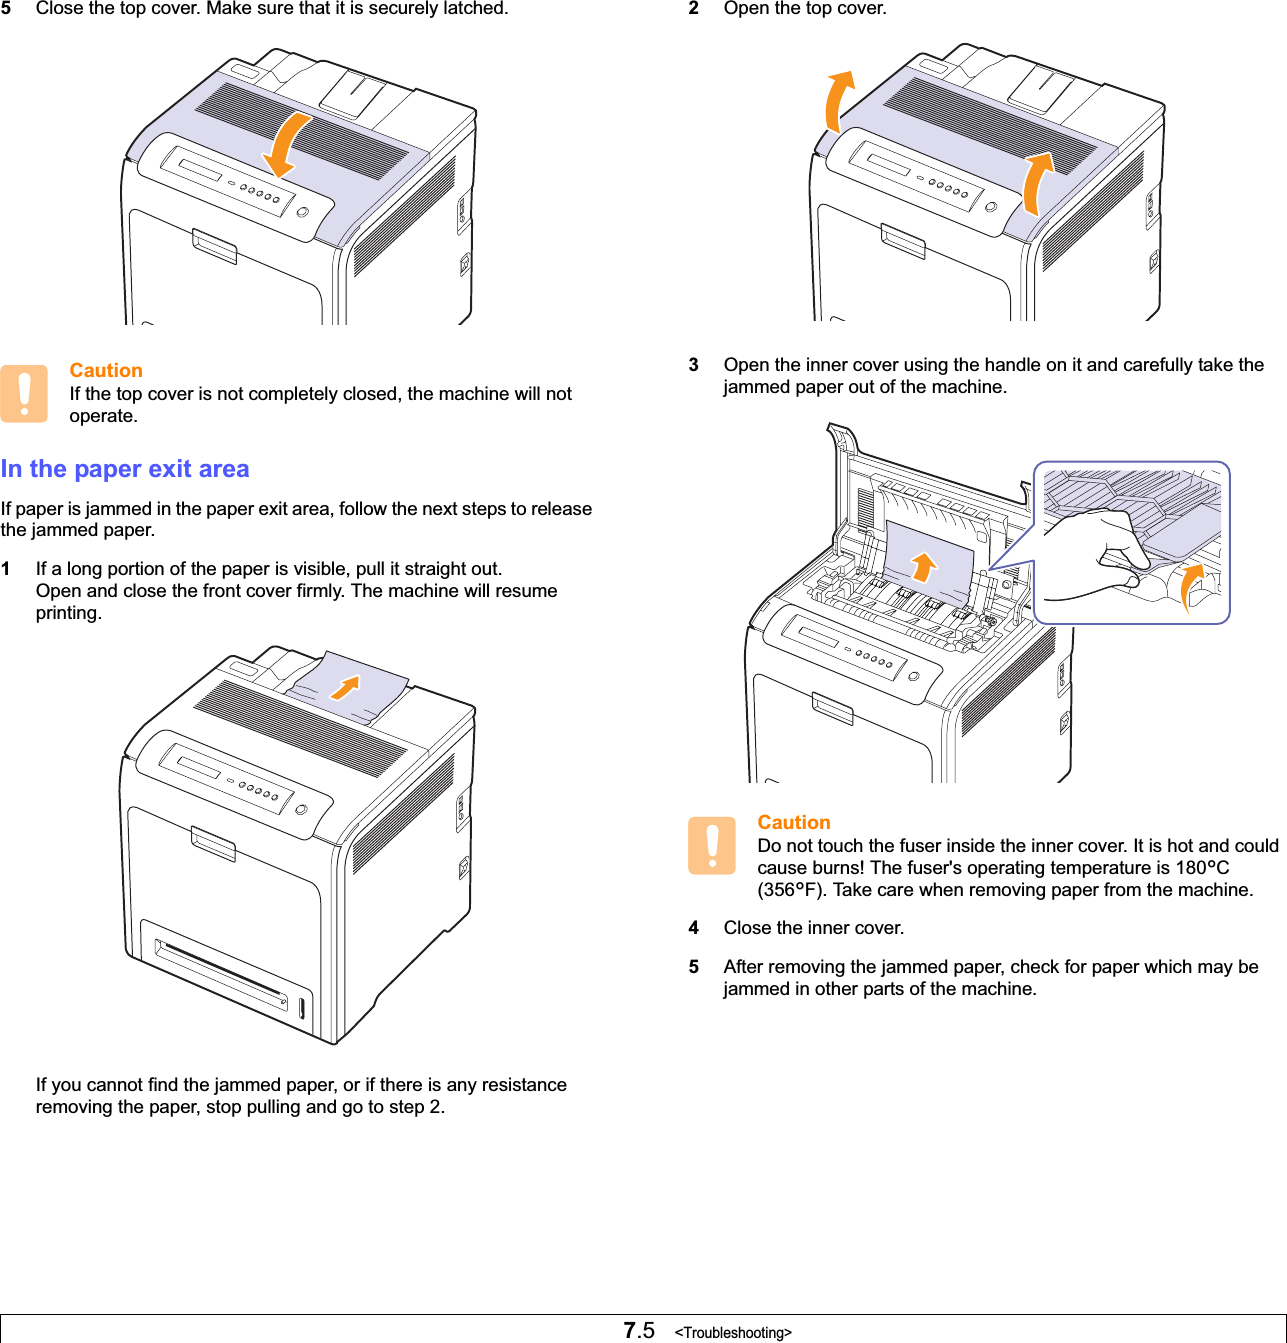 7.5   &lt;Troubleshooting&gt;5Close the top cover. Make sure that it is securely latched.CautionIf the top cover is not completely closed, the machine will not operate.In the paper exit areaIf paper is jammed in the paper exit area, follow the next steps to release the jammed paper.1If a long portion of the paper is visible, pull it straight out. Open and close the front cover firmly. The machine will resume printing.If you cannot find the jammed paper, or if there is any resistance removing the paper, stop pulling and go to step 2.2Open the top cover.3Open the inner cover using the handle on it and carefully take the jammed paper out of the machine. CautionDo not touch the fuser inside the inner cover. It is hot and could cause burns! The fuser&apos;s operating temperature is 180°C(356°F). Take care when removing paper from the machine.4Close the inner cover.5After removing the jammed paper, check for paper which may be jammed in other parts of the machine.